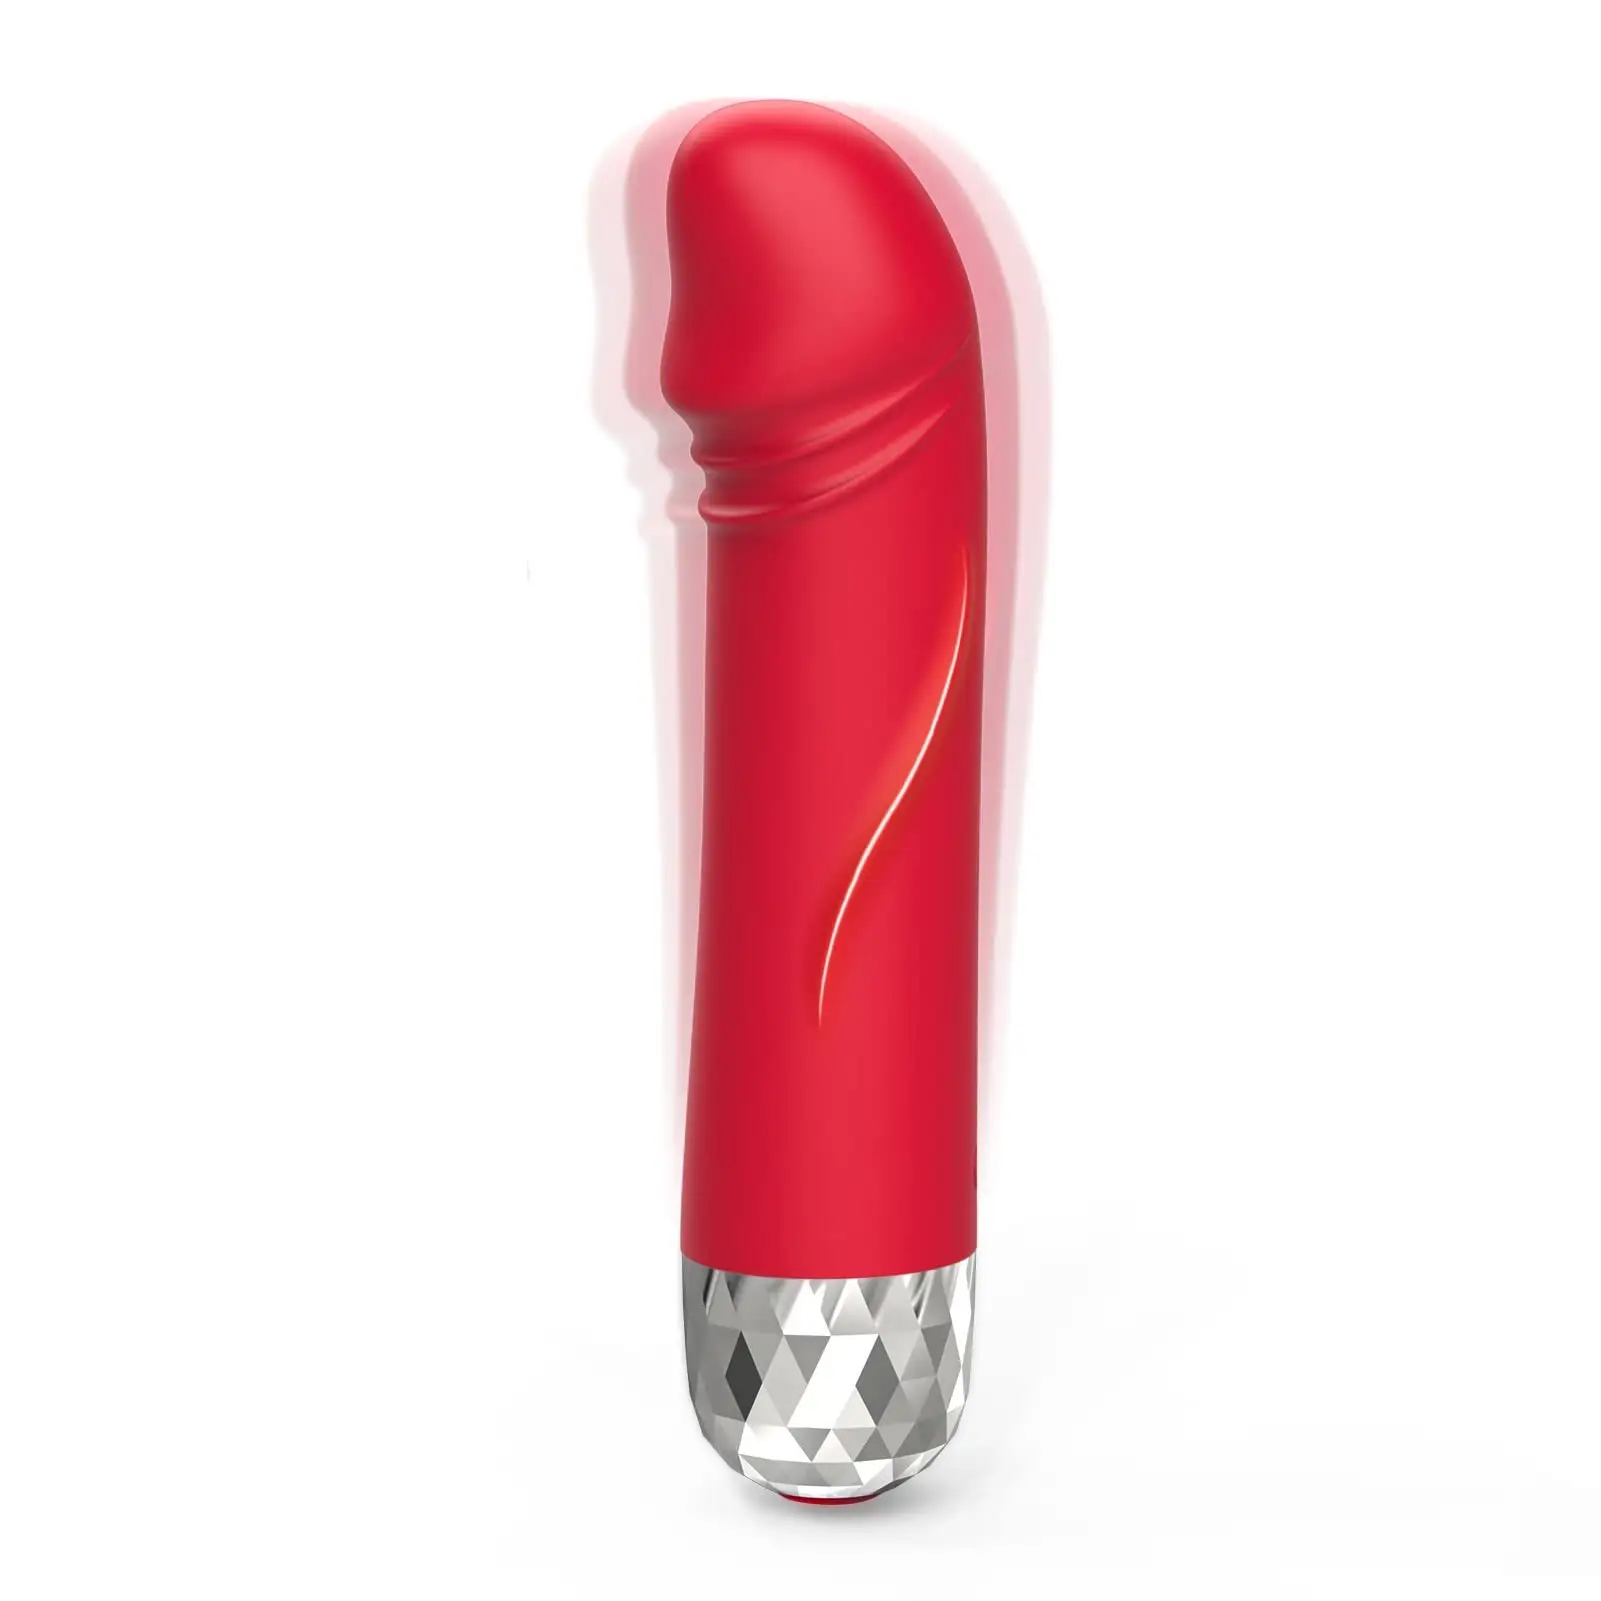 Mini G Spot Bullet Vibrator Massager for Clitoral Nipple and Anal Stimulation, Adult Sex Toy for Woman Couples sex toy for women